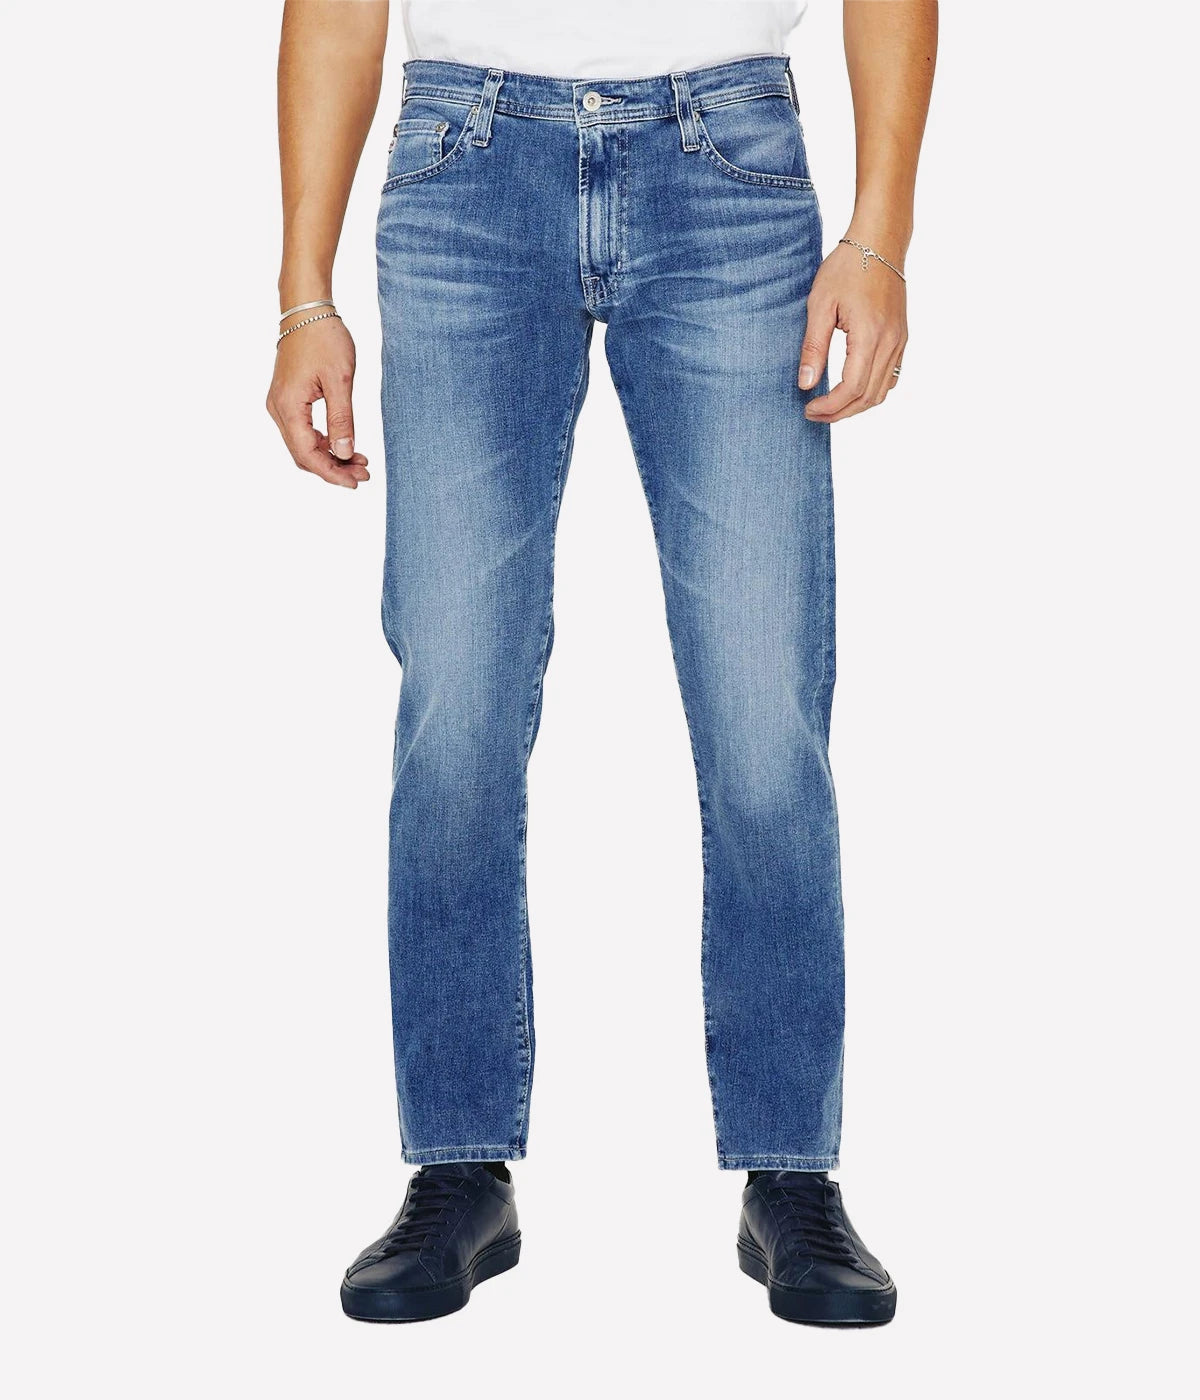 Slim jean for men in a feaded medium blue wash by AG.